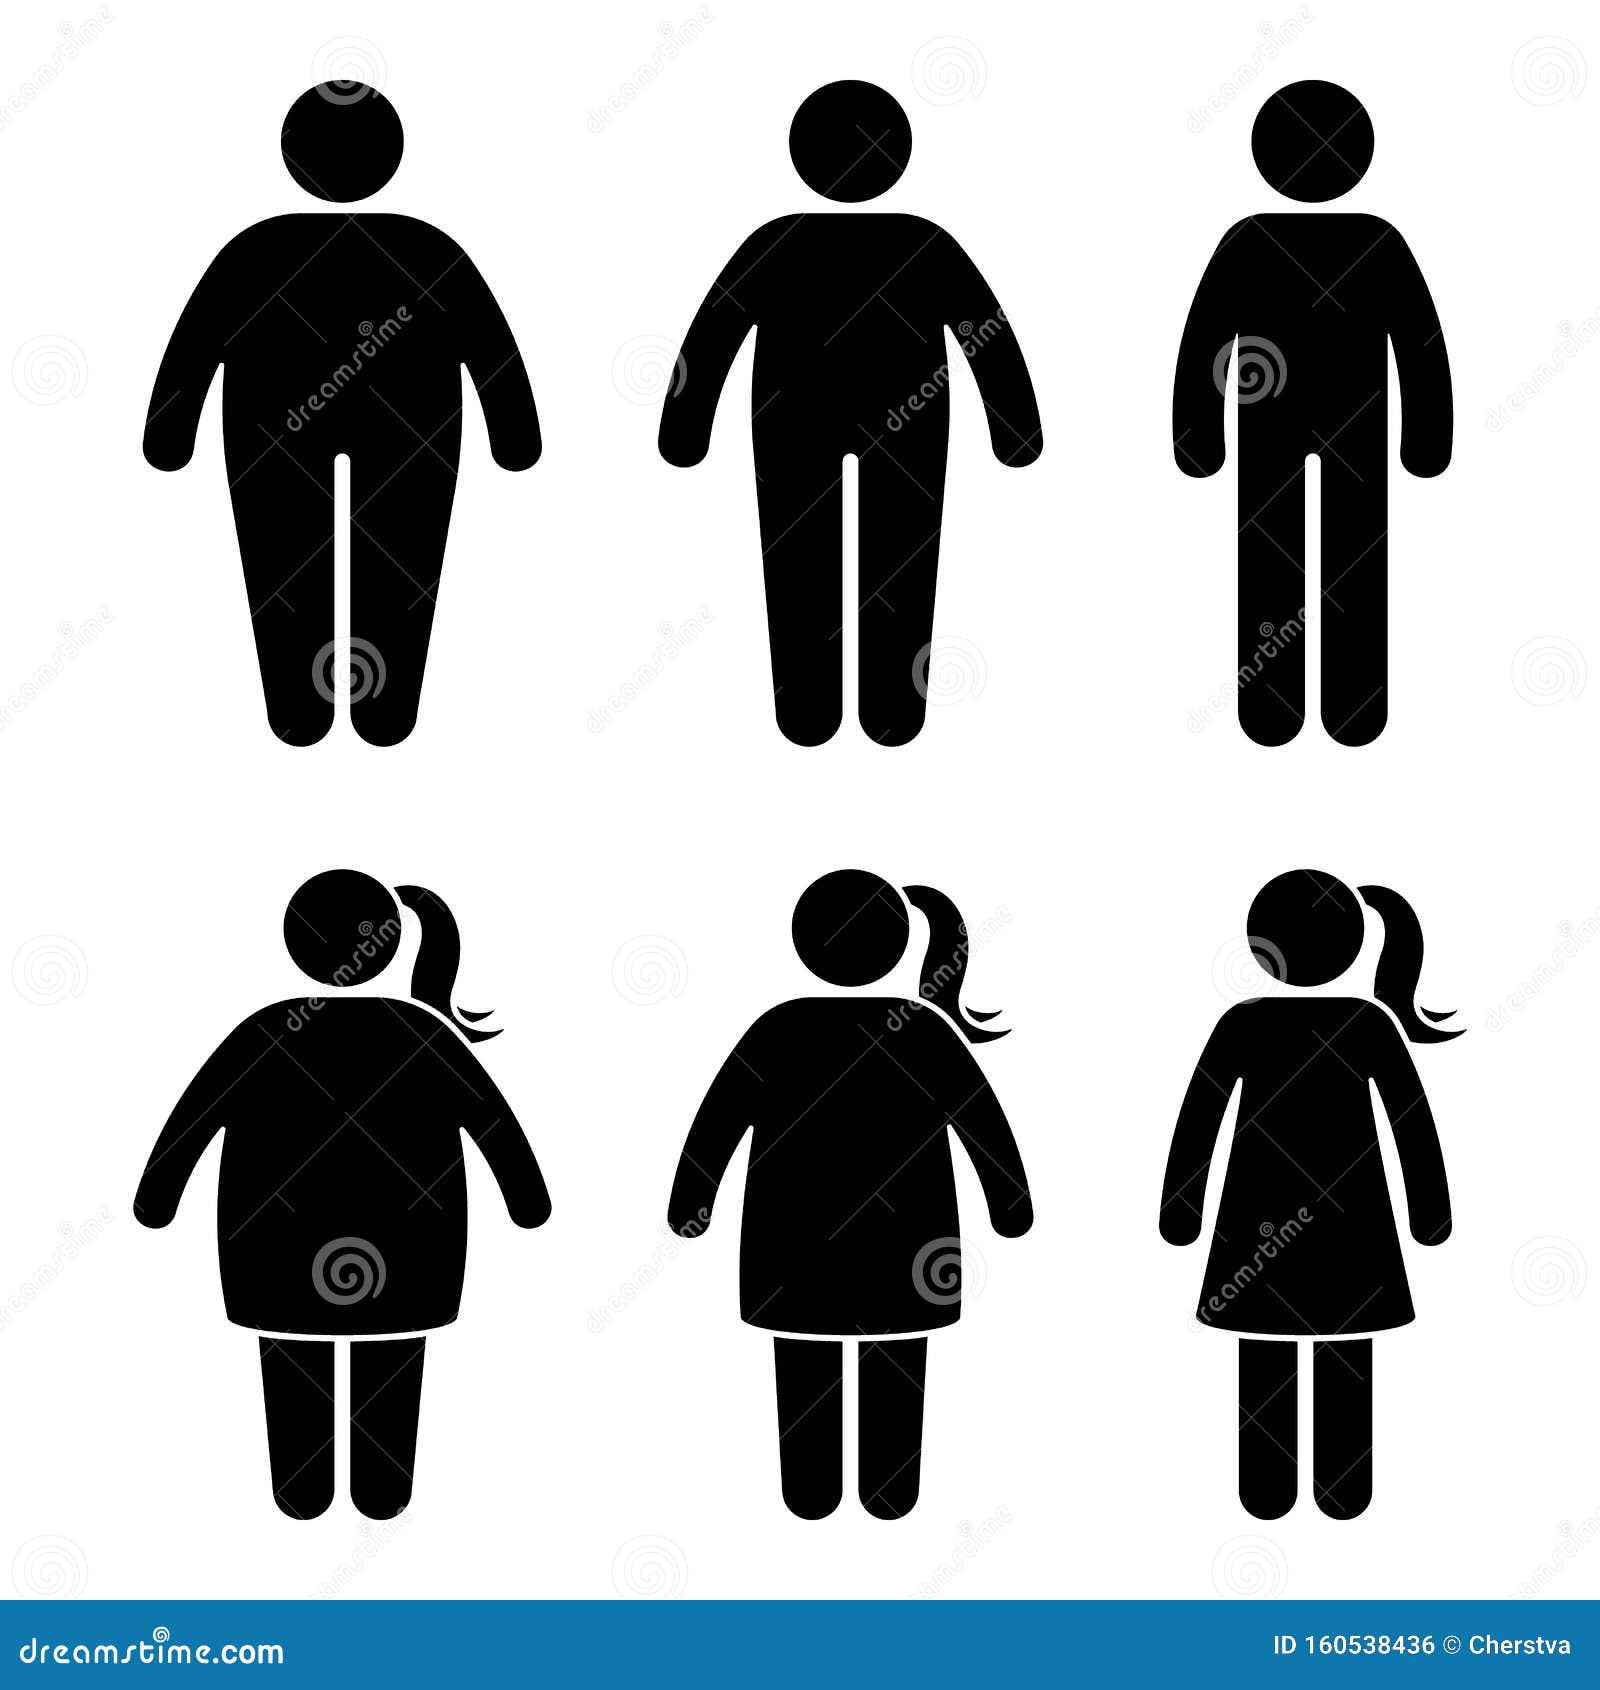 fat stick figure  icon set. obese people couple black and white flat style pictogram